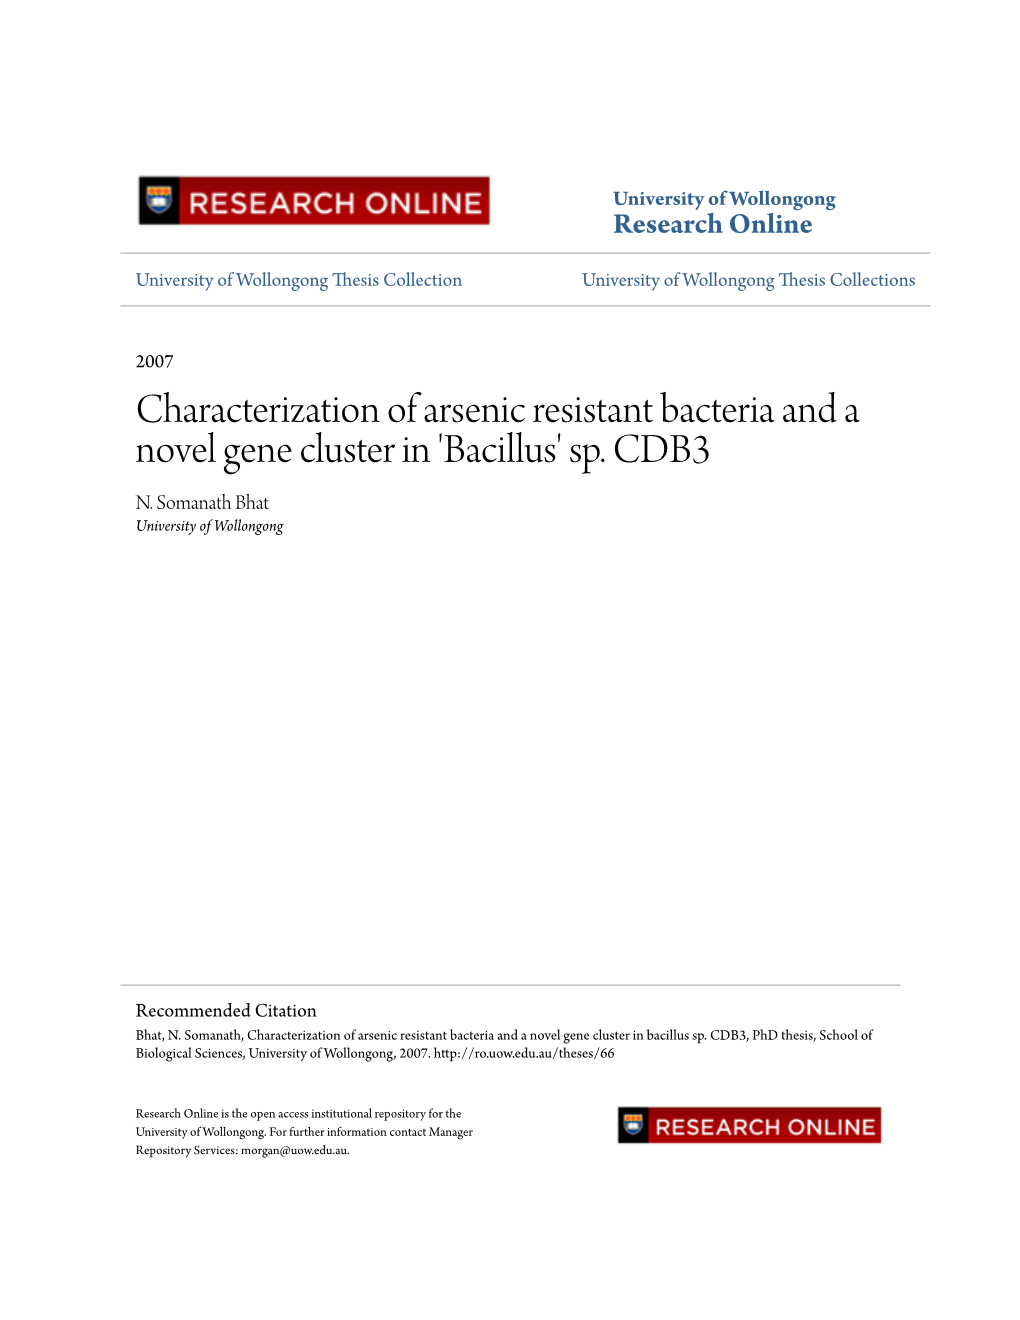 Characterization of Arsenic Resistant Bacteria and a Novel Gene Cluster in 'Bacillus' Sp